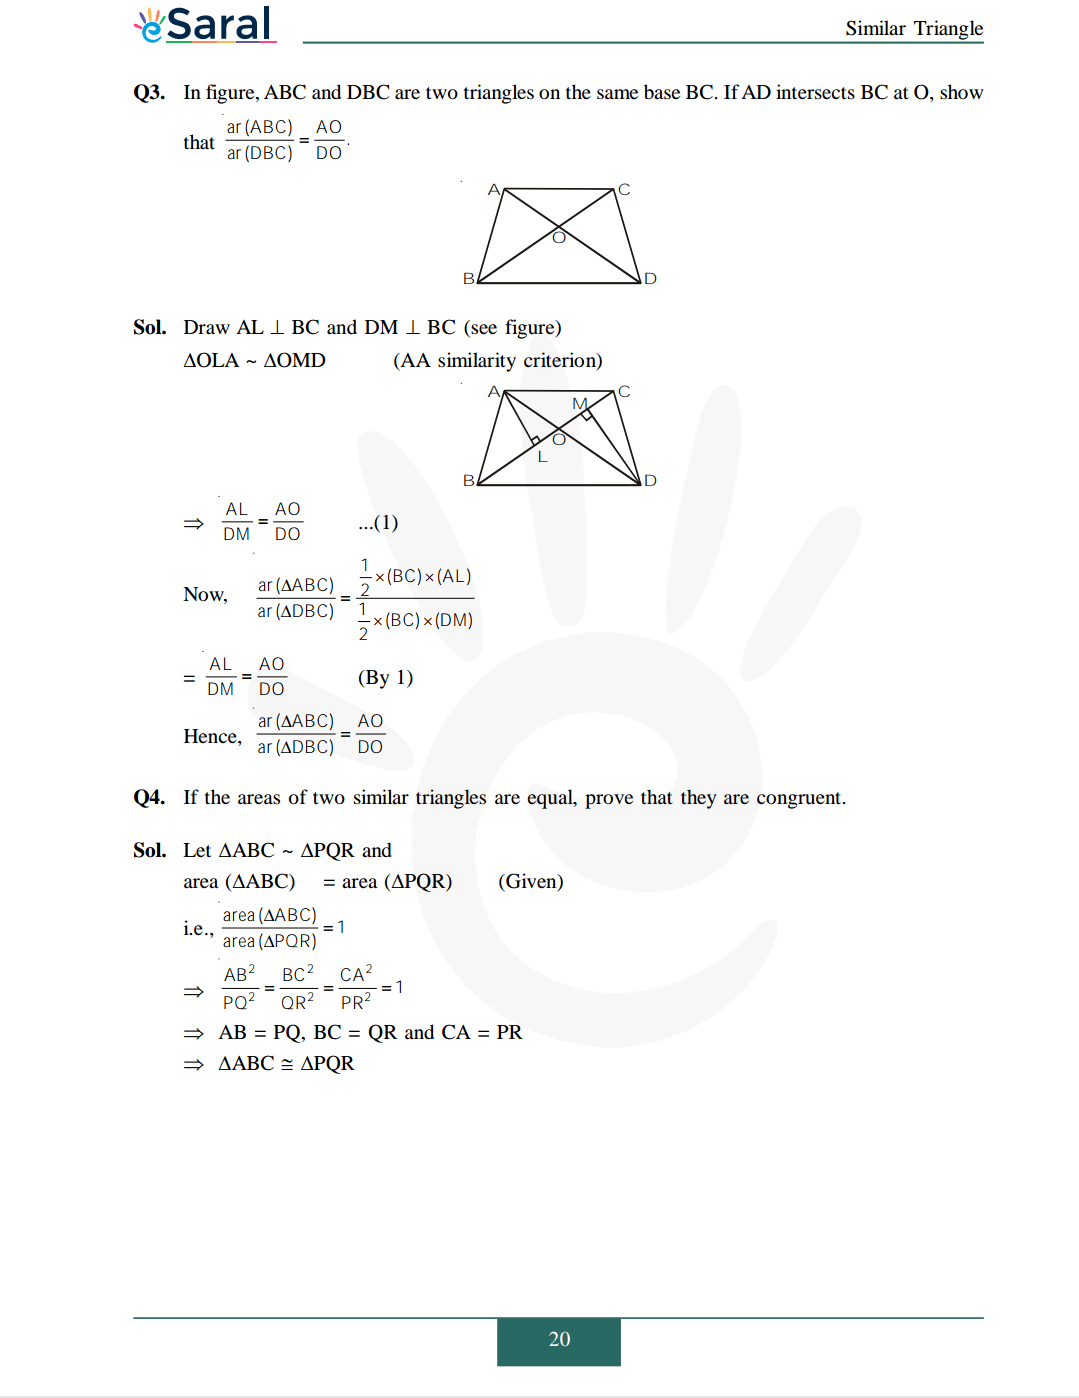 Class 10 Maths Chapter 6 exercise 6.4 solutions Image 2